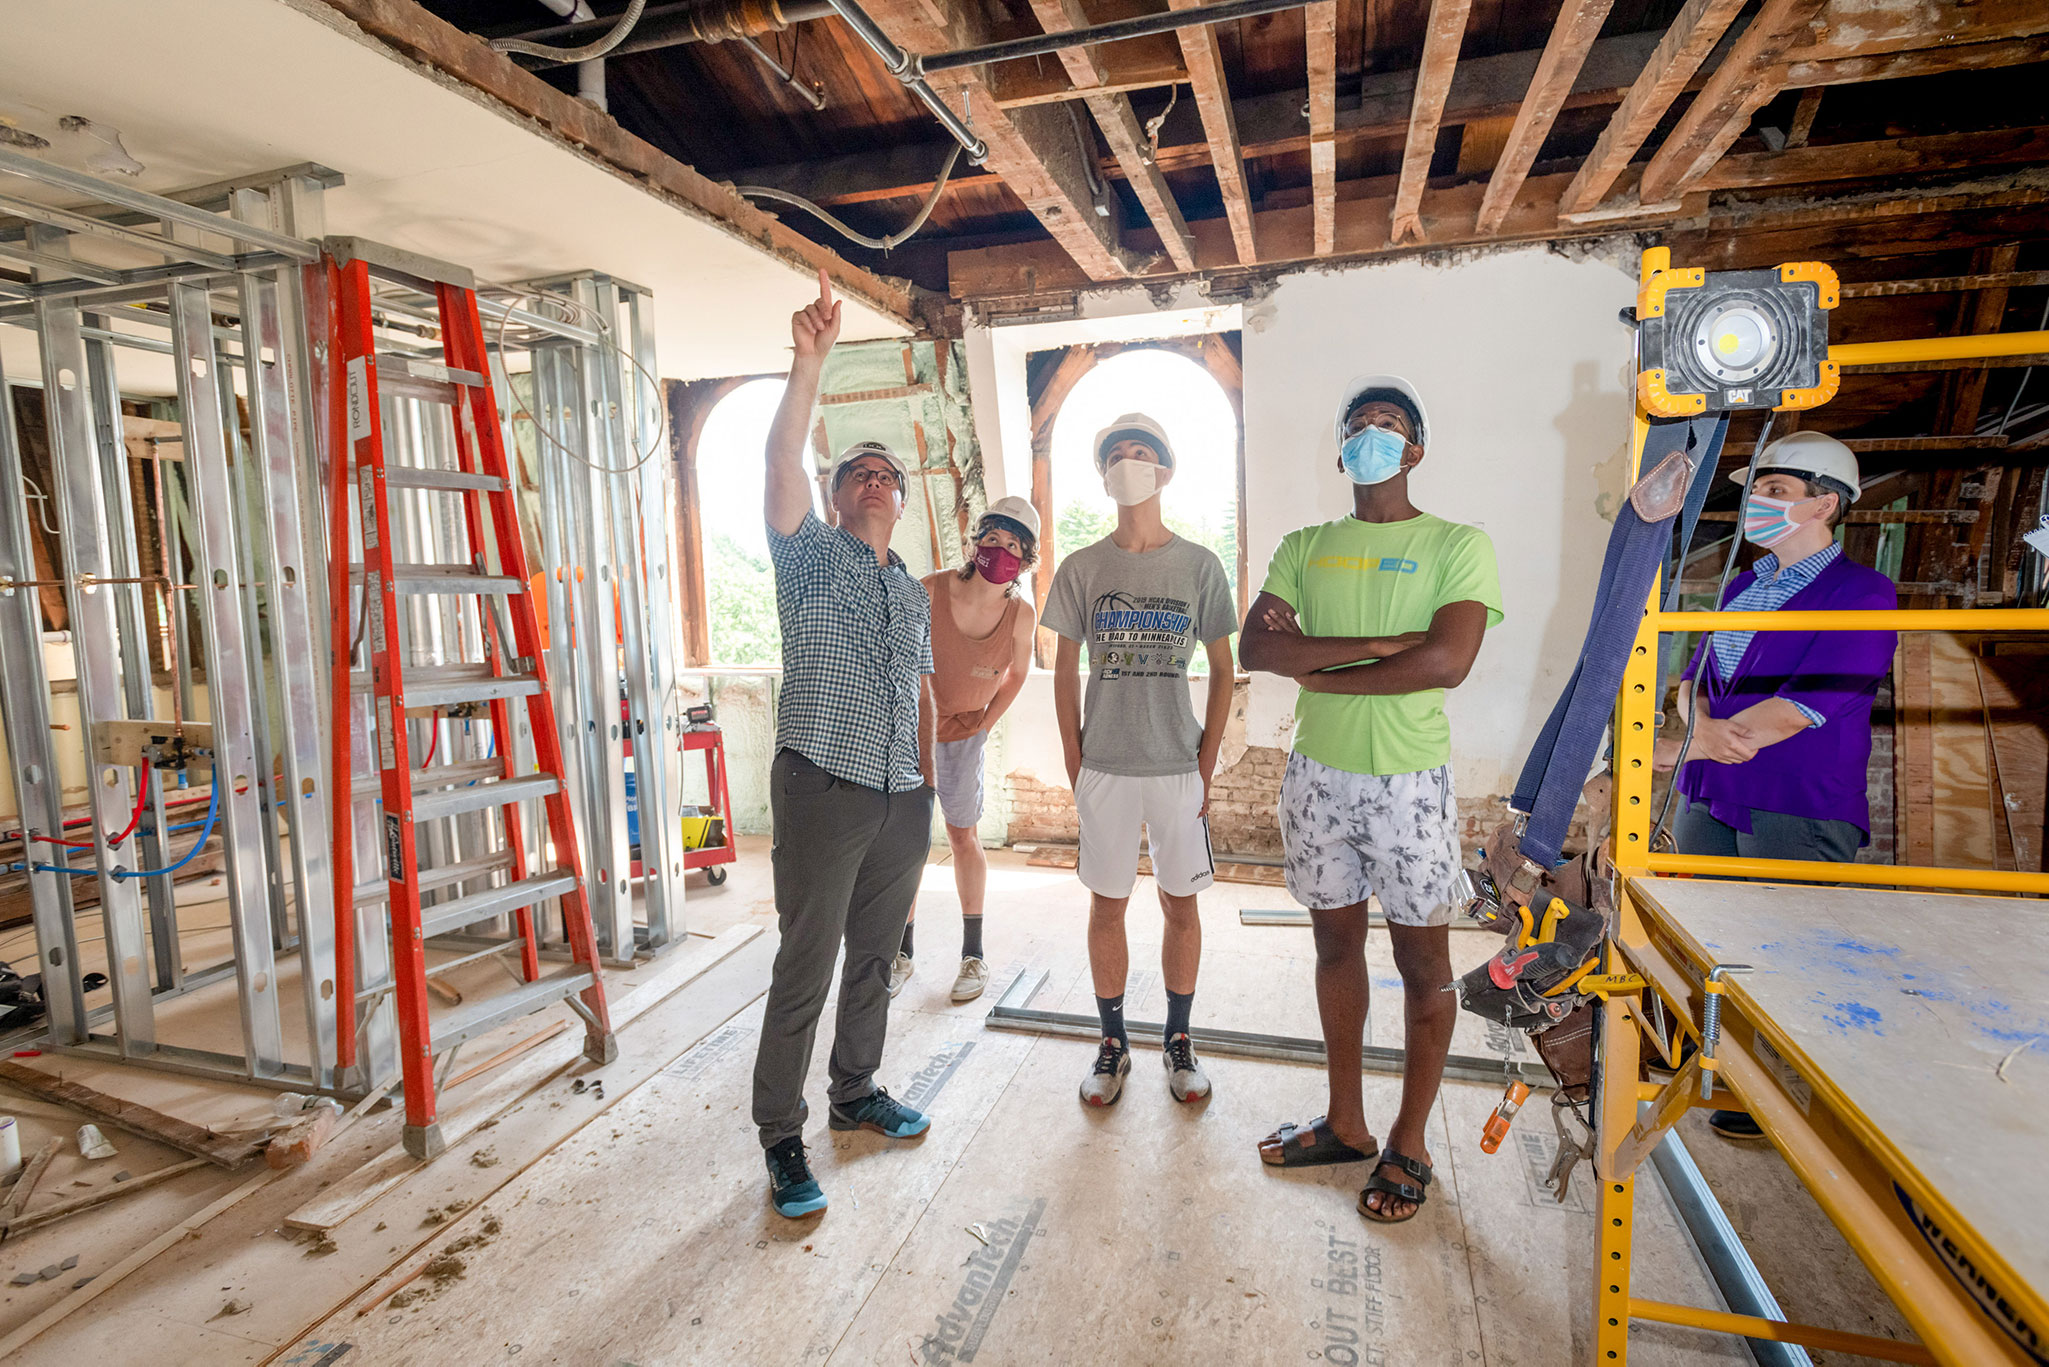 Corrigan (left) leads a tour of the renovations of student residences on the fifth floor of Main. Others in photo, from left: Sustainability Intern Martin Burstein ’23, Arlington High School Senior Ron Geiger, Oakwood Friends School Senior Barak Tucker, and Vassar Sustainability Director Micah Kenfield.